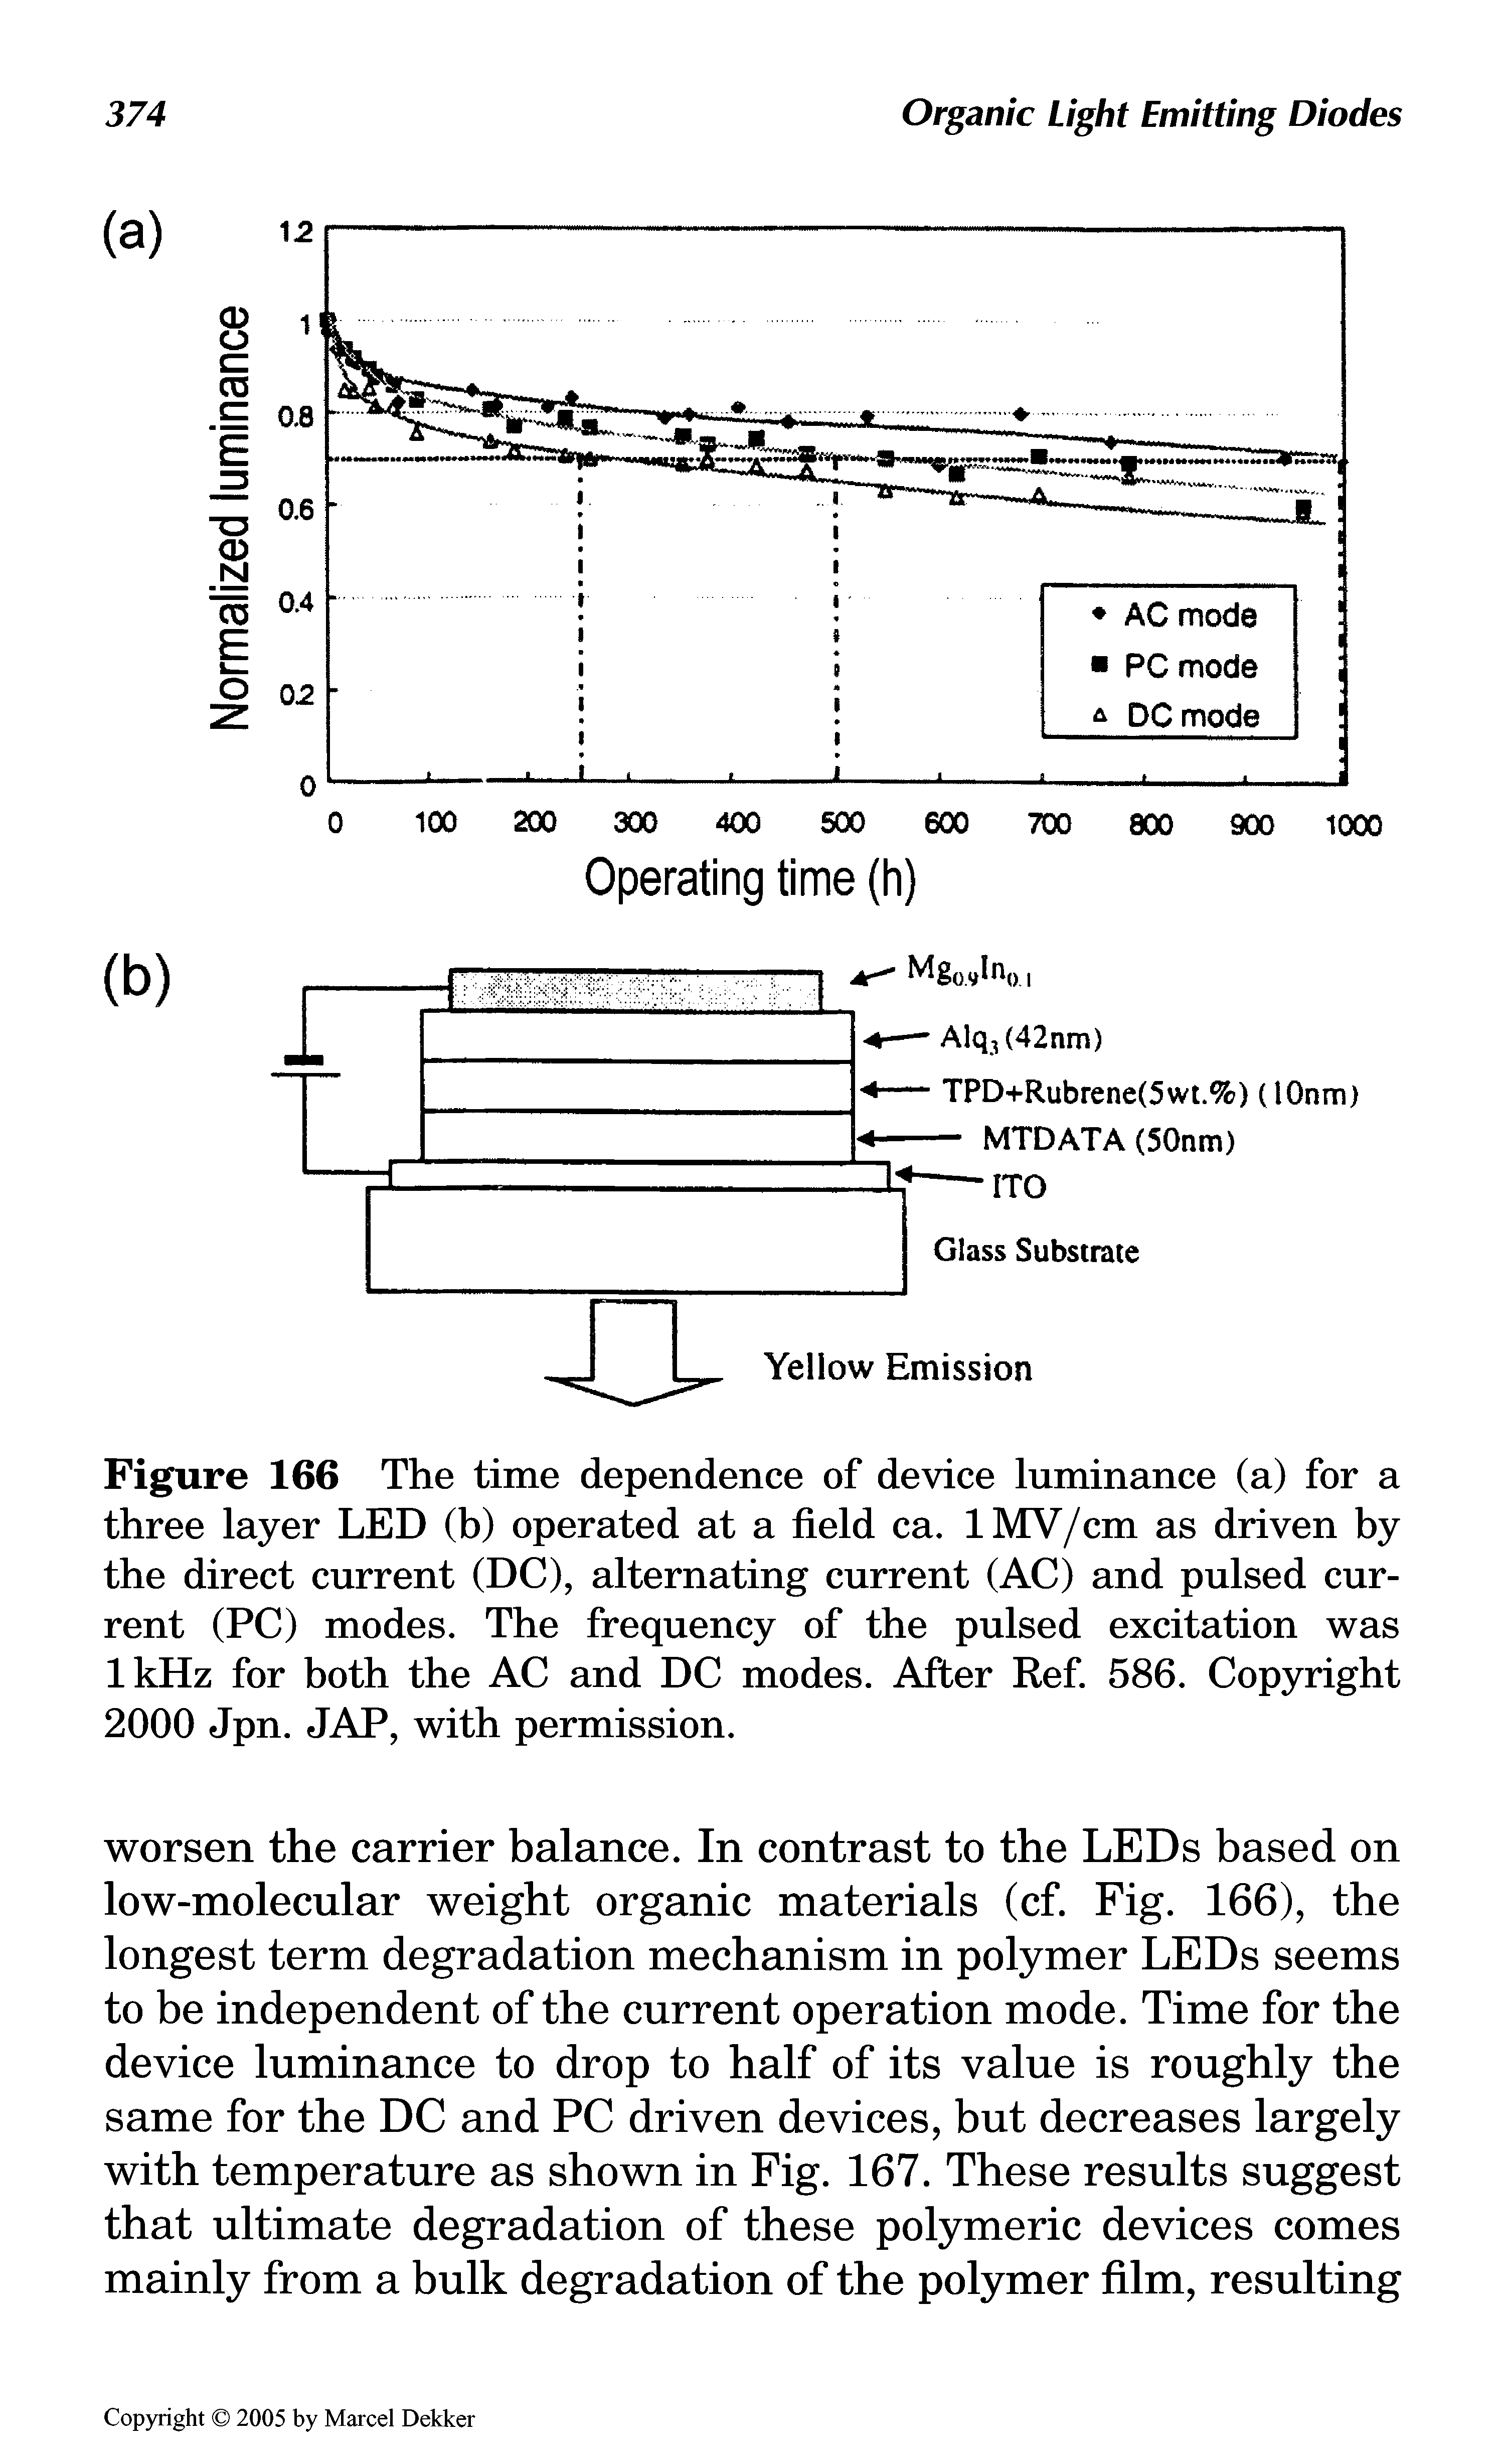 Figure 166 The time dependence of device luminance (a) for a three layer LED (b) operated at a field ca. lMV/cm as driven by the direct current (DC), alternating current (AC) and pulsed current (PC) modes. The frequency of the pulsed excitation was 1kHz for both the AC and DC modes. After Ref. 586. Copyright 2000 Jpn. JAP, with permission.